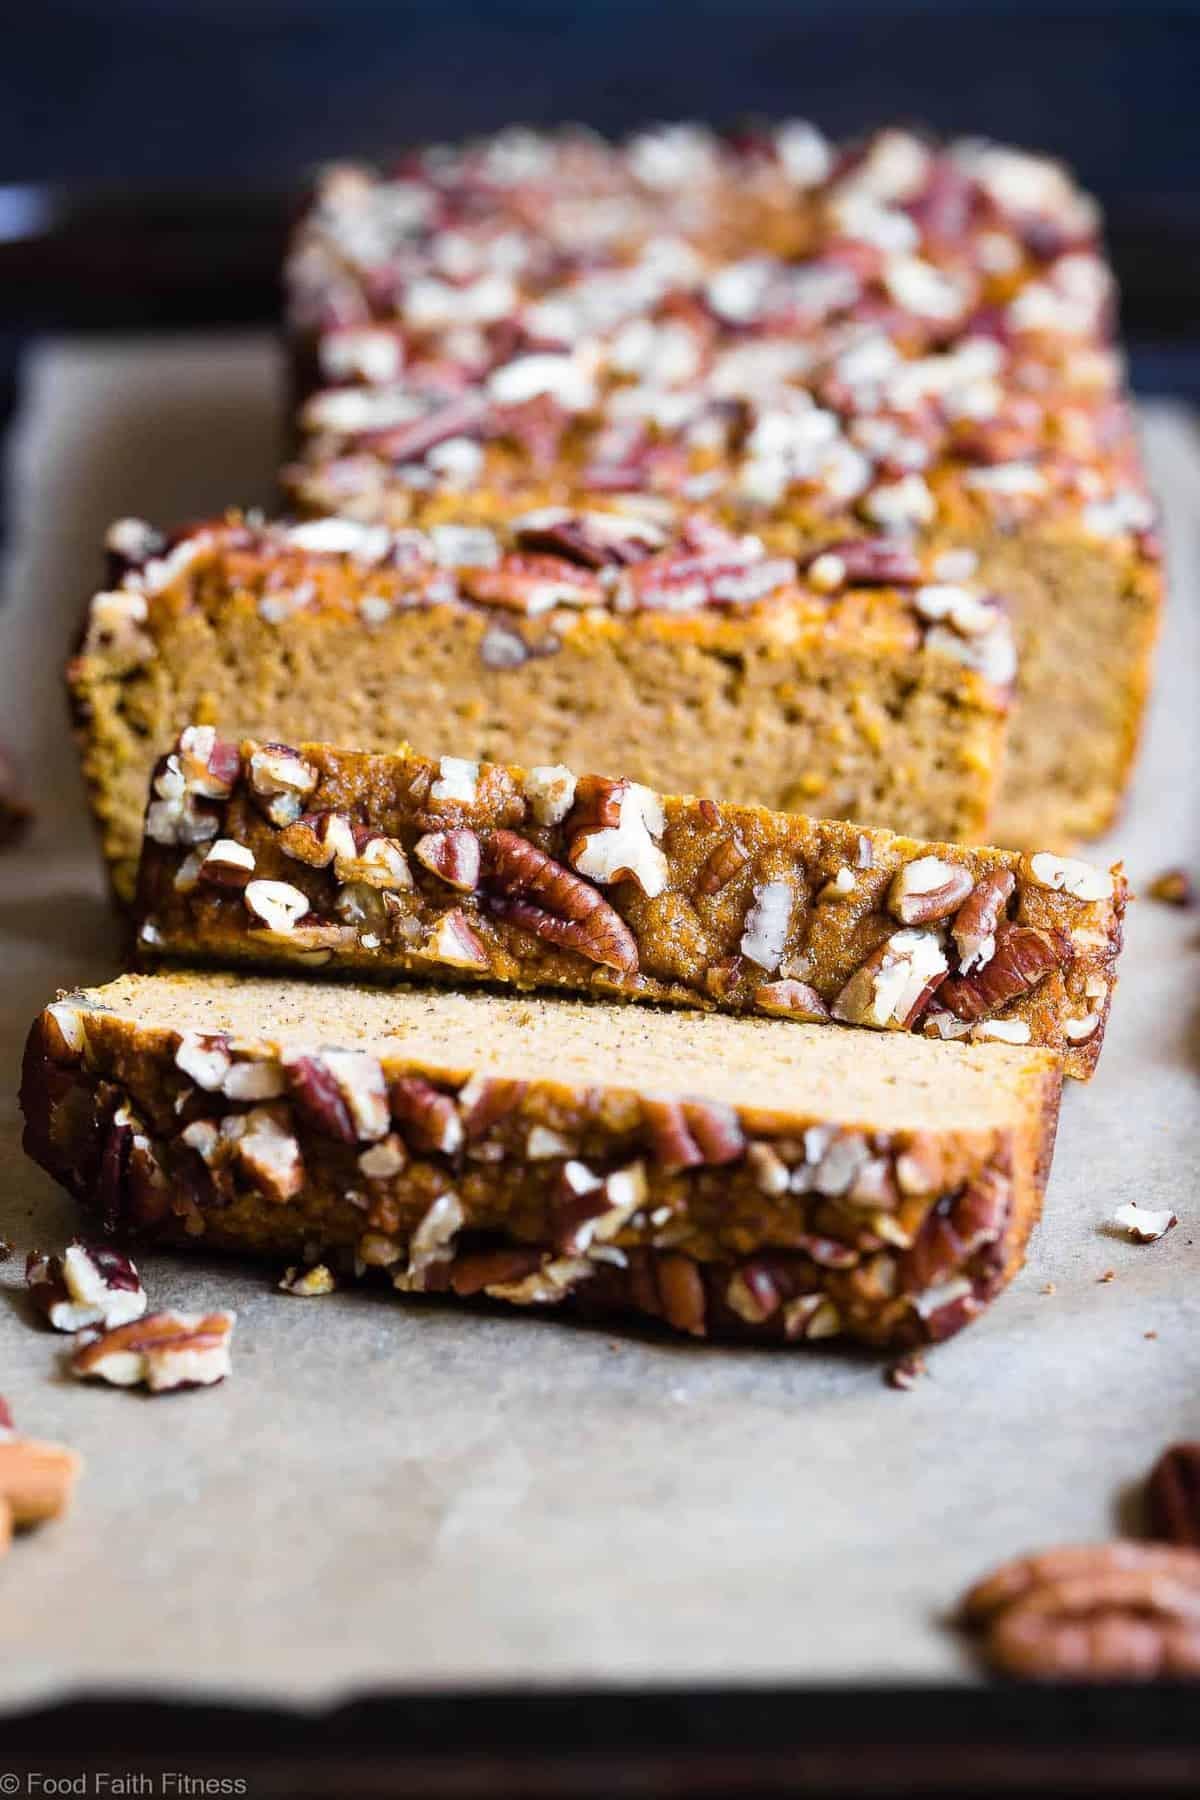 Gluten Free Paleo Pumpkin Bread Recipe - This EASY, healthy pumpkin bread is SO moist, chewy and perfectly spicy-sweet! All the best parts of fall in a simple, wholesome recipe that is great for breakfasts or snacks! | #Foodfaithfitness | #Glutenfree #Paleo #Healthy #Grainfree #Pumpkin